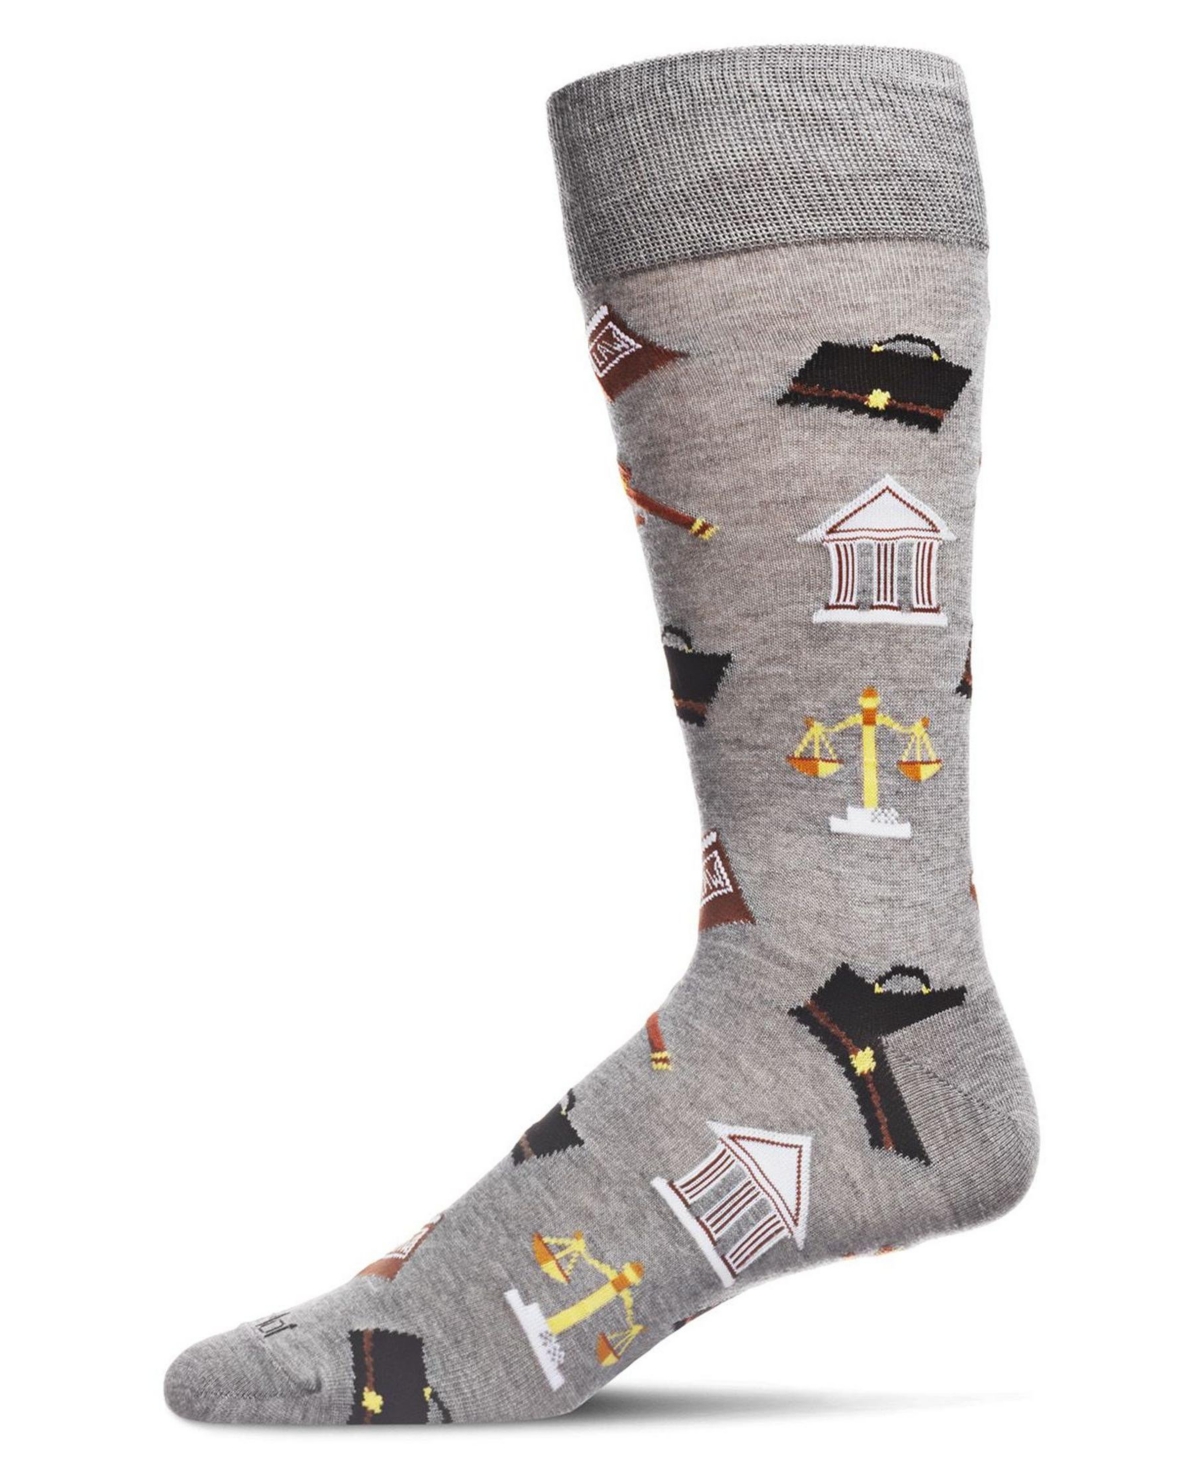 Men's Law and Order Heathered Rayon from Bamboo Novelty Crew Socks - Denim Heather